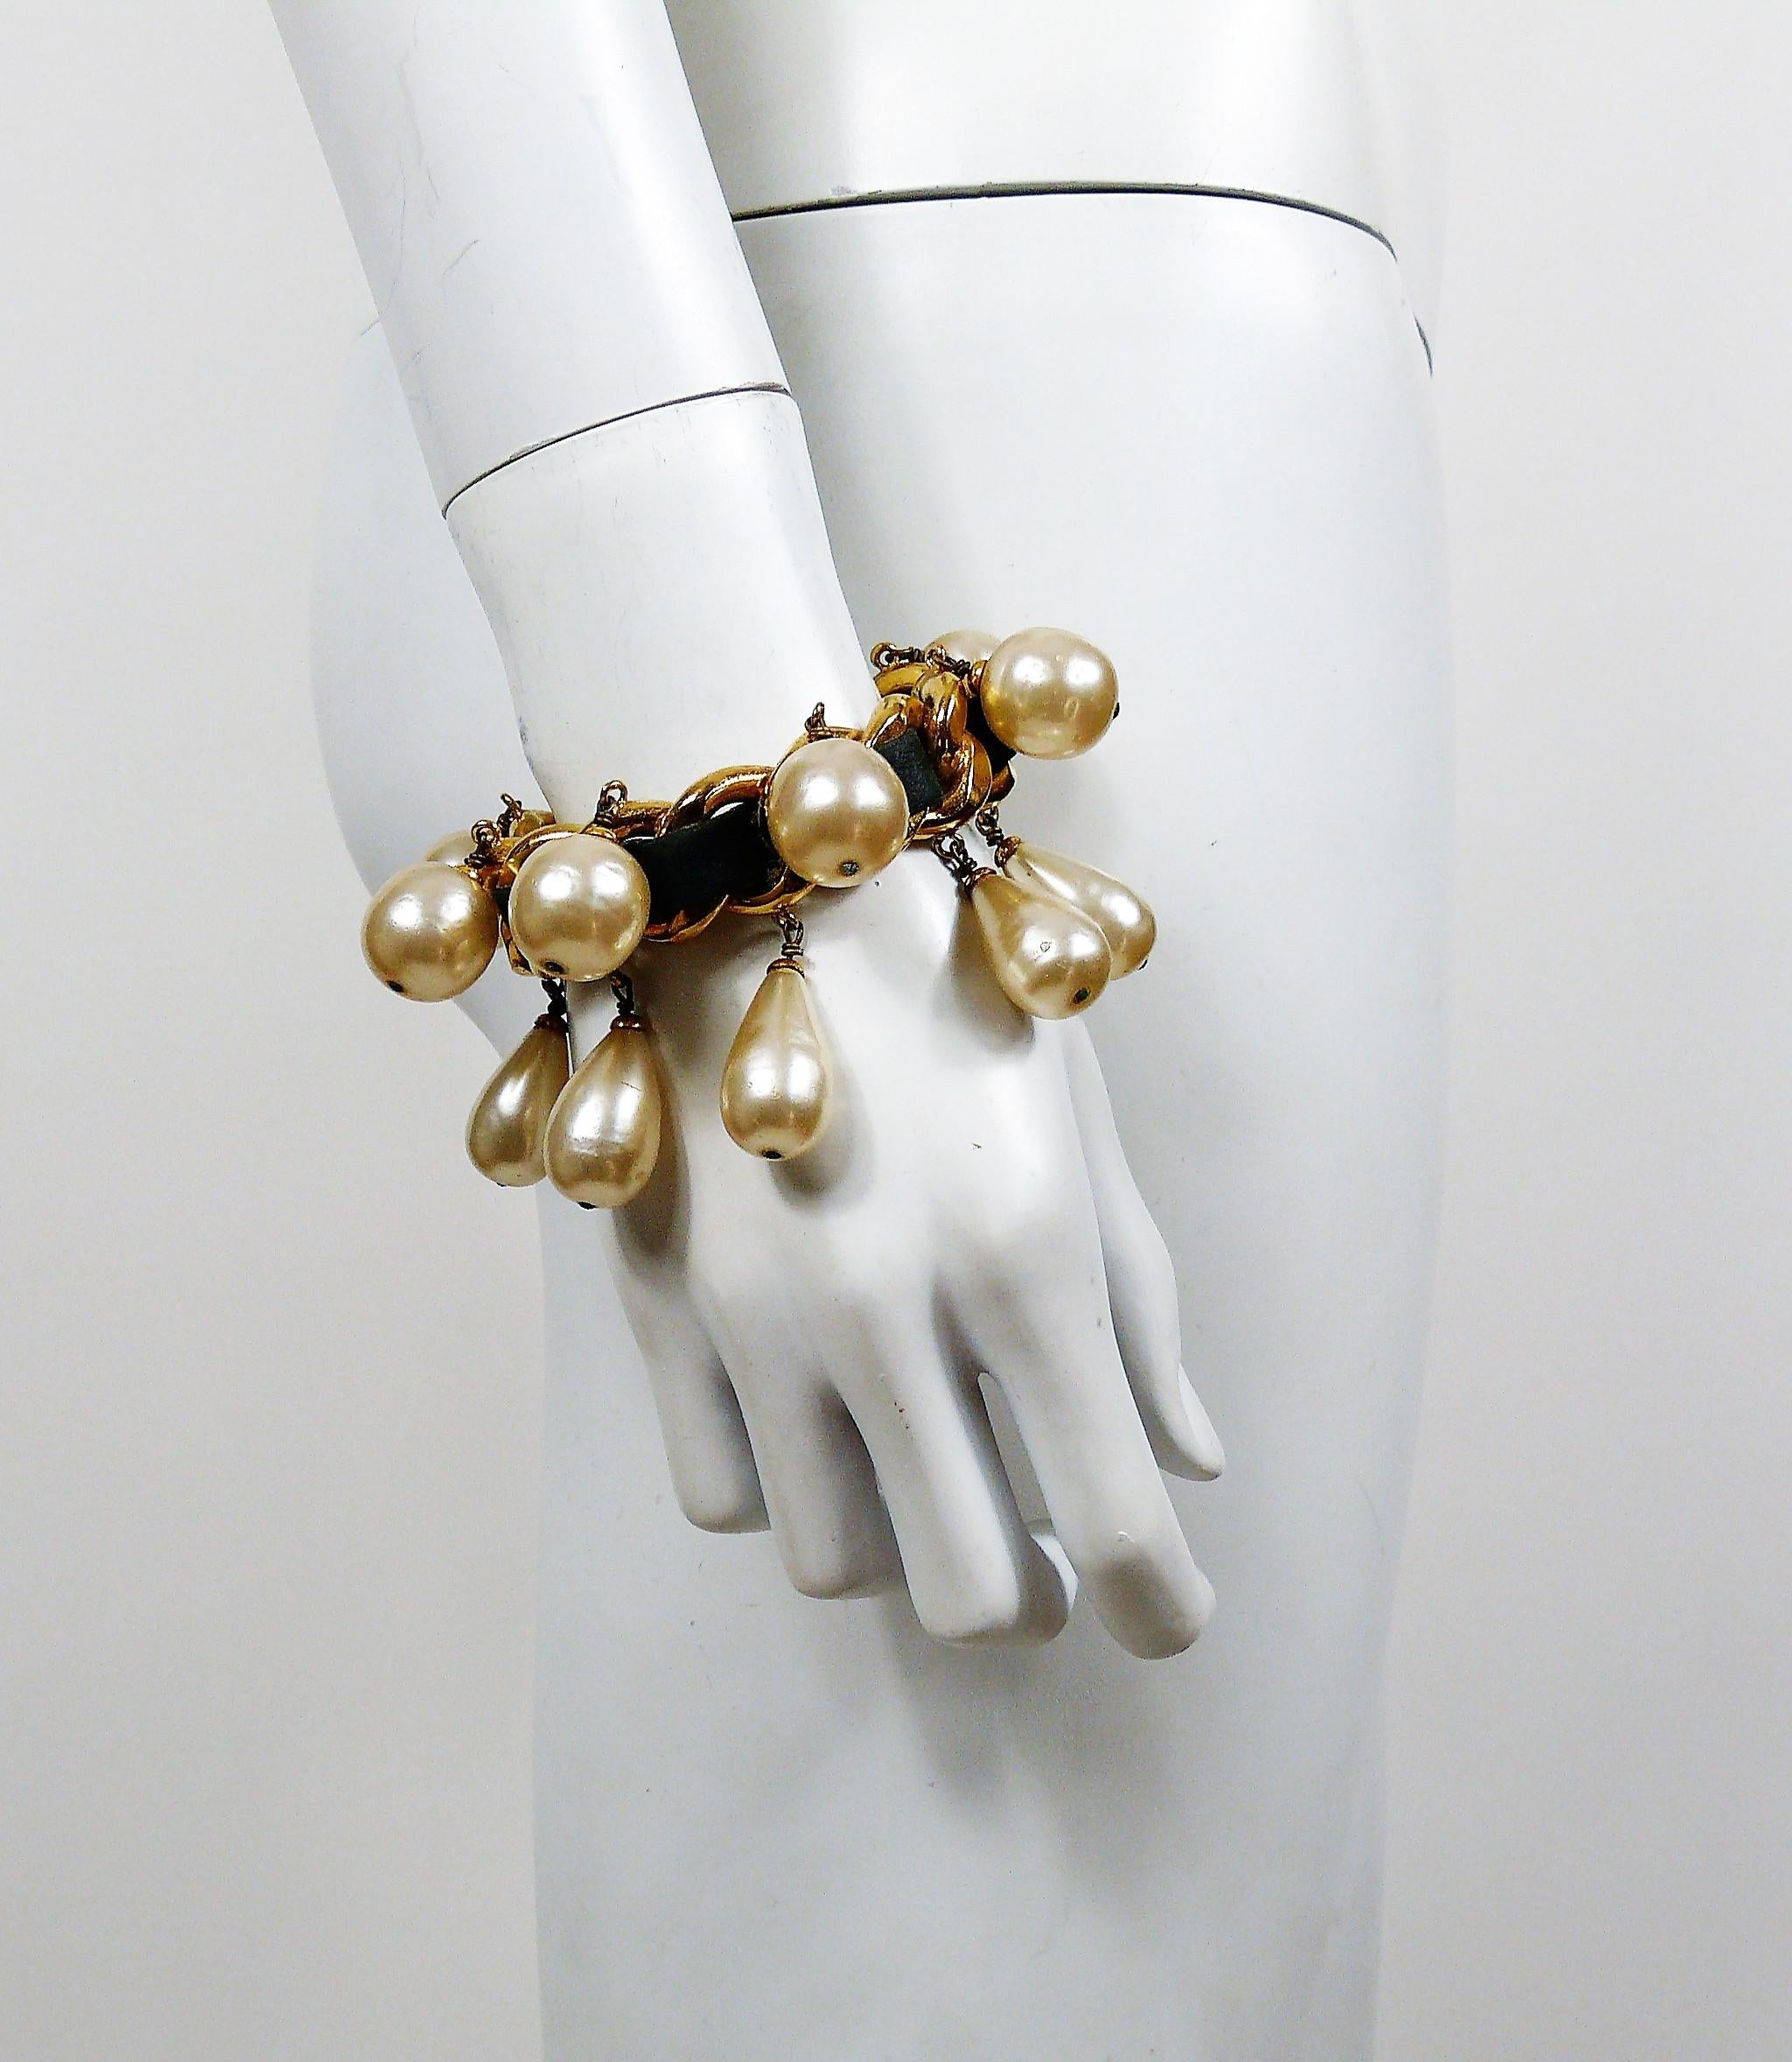 Chanel vintage rare gold toned woven chain and black leather rigid cuff bracelet featuring large dangling glass faux pearls.

Collection year : 1988.

Marked CHANEL 2 3 Made in France.
Engraved S for private sale.

Indicative measurements : inner